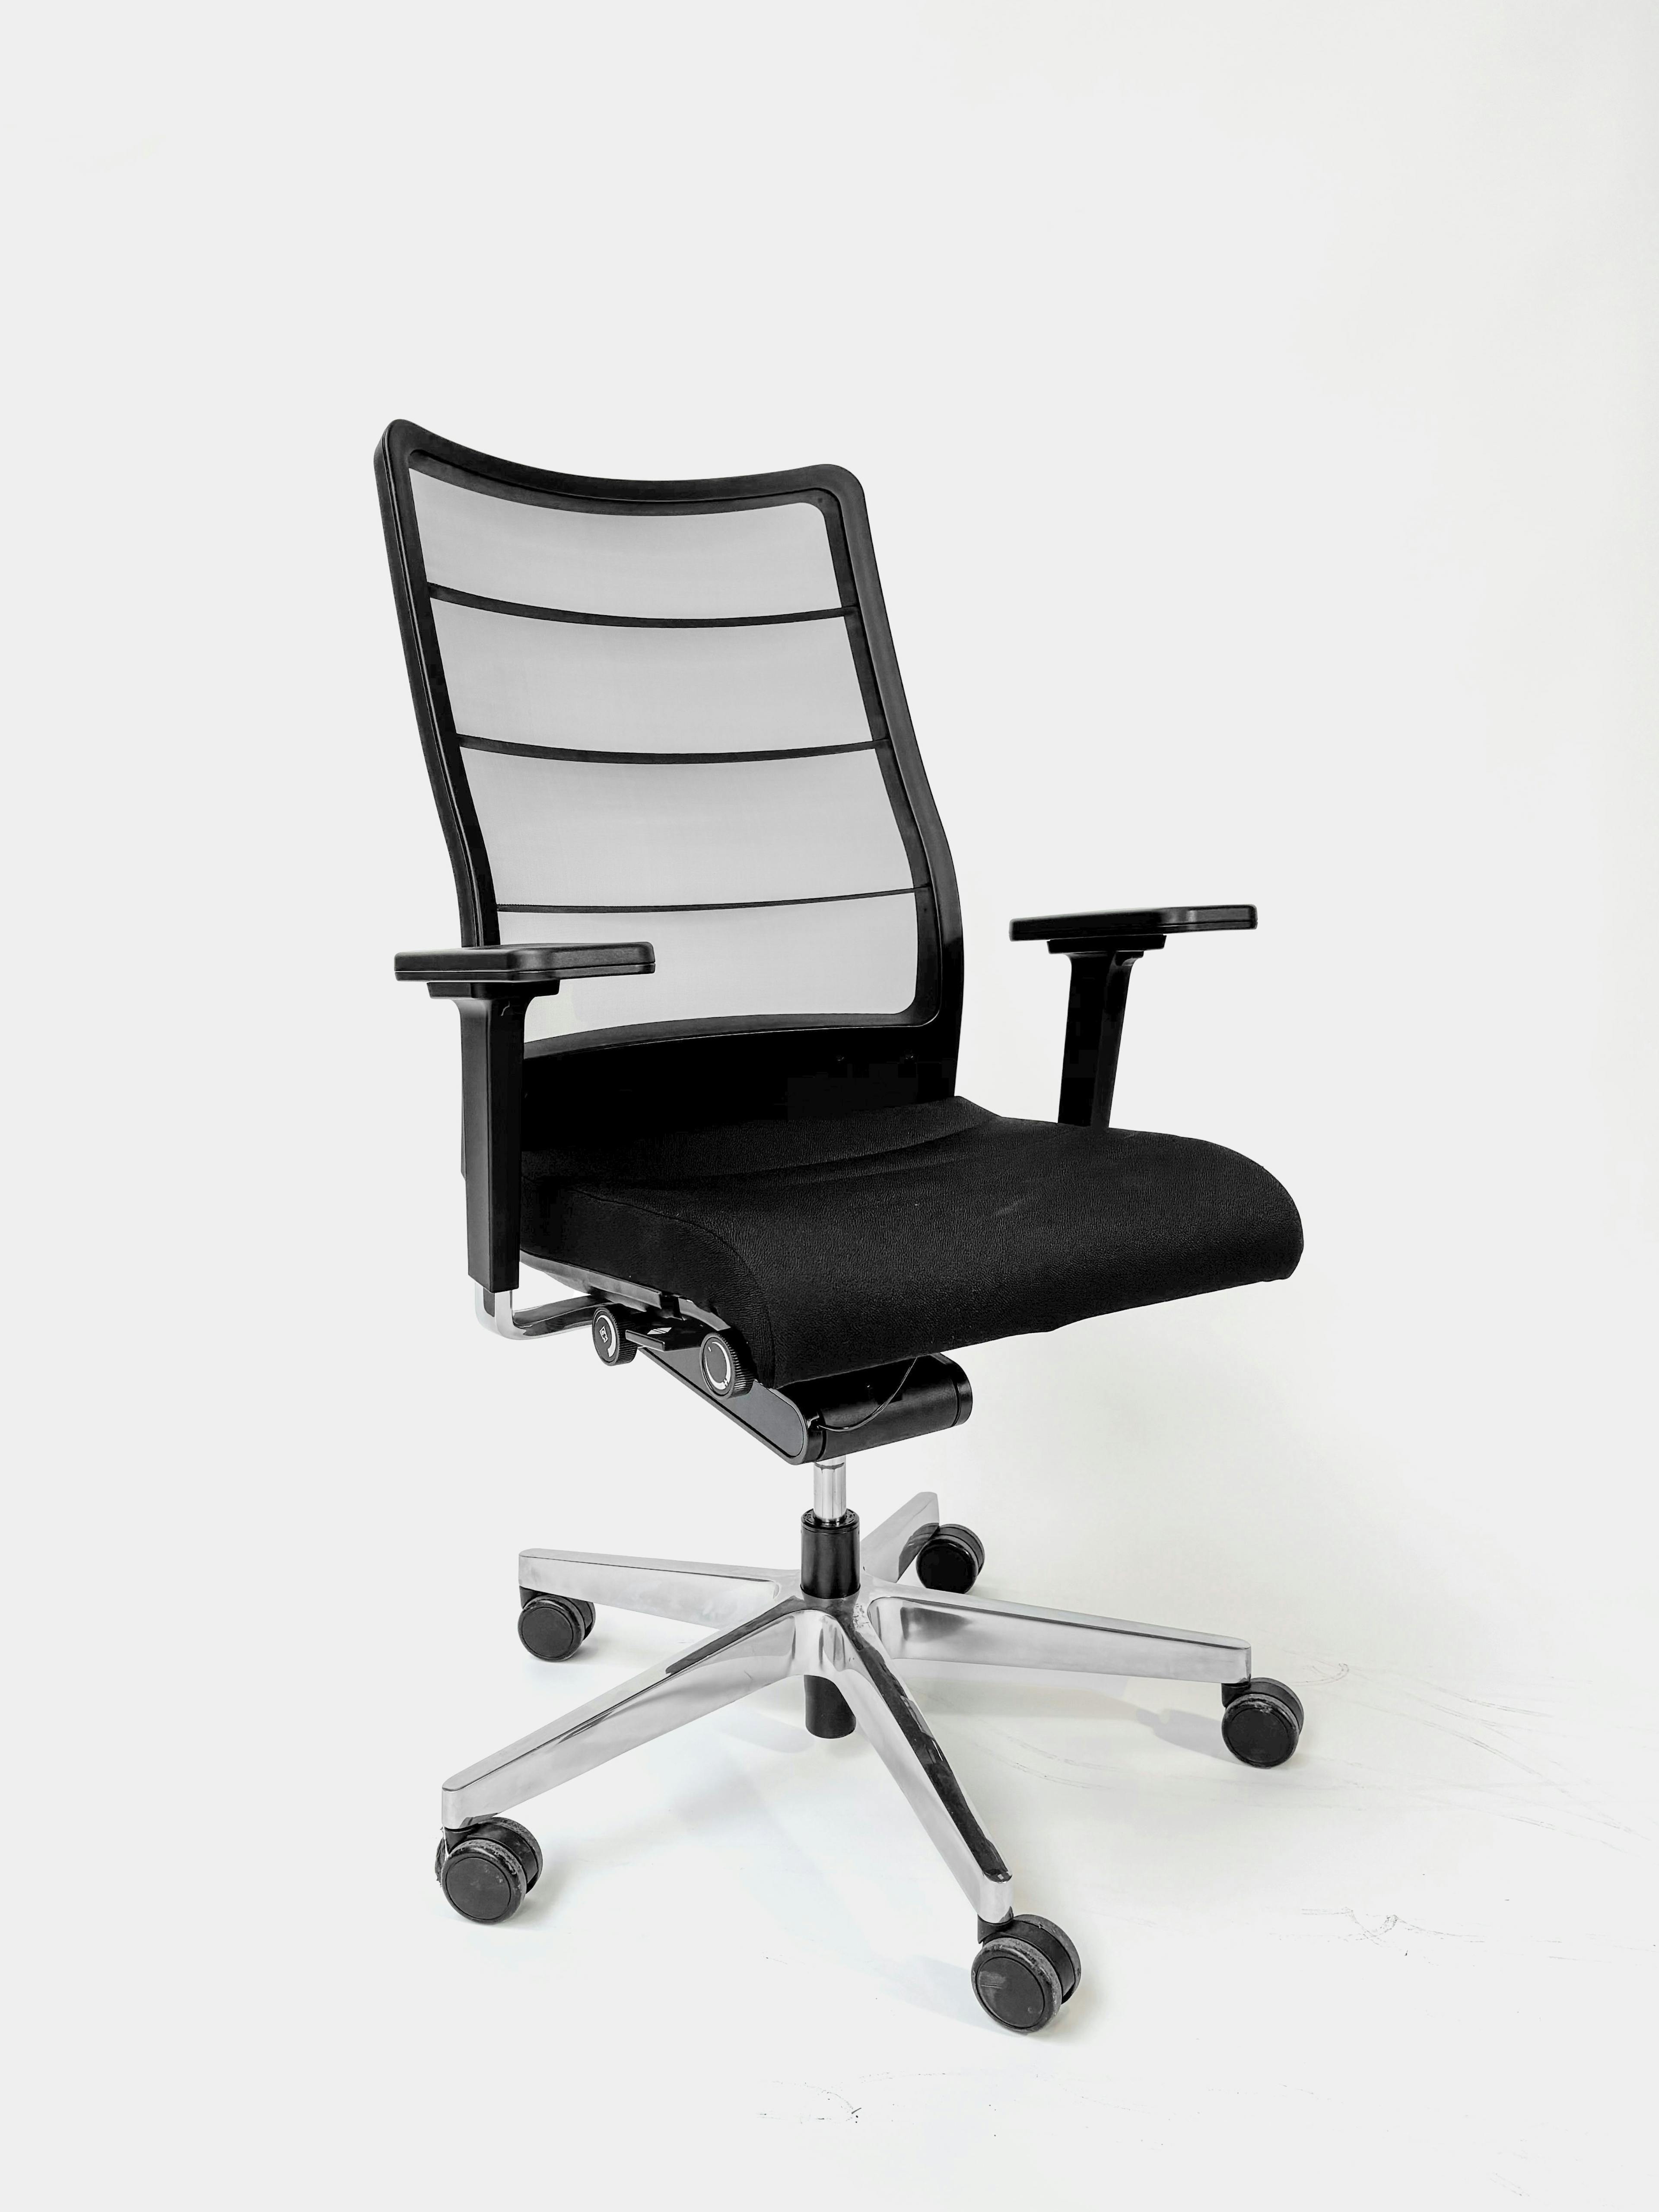 INTERSTUHL Black office chair with mesh back  - Relieve Furniture